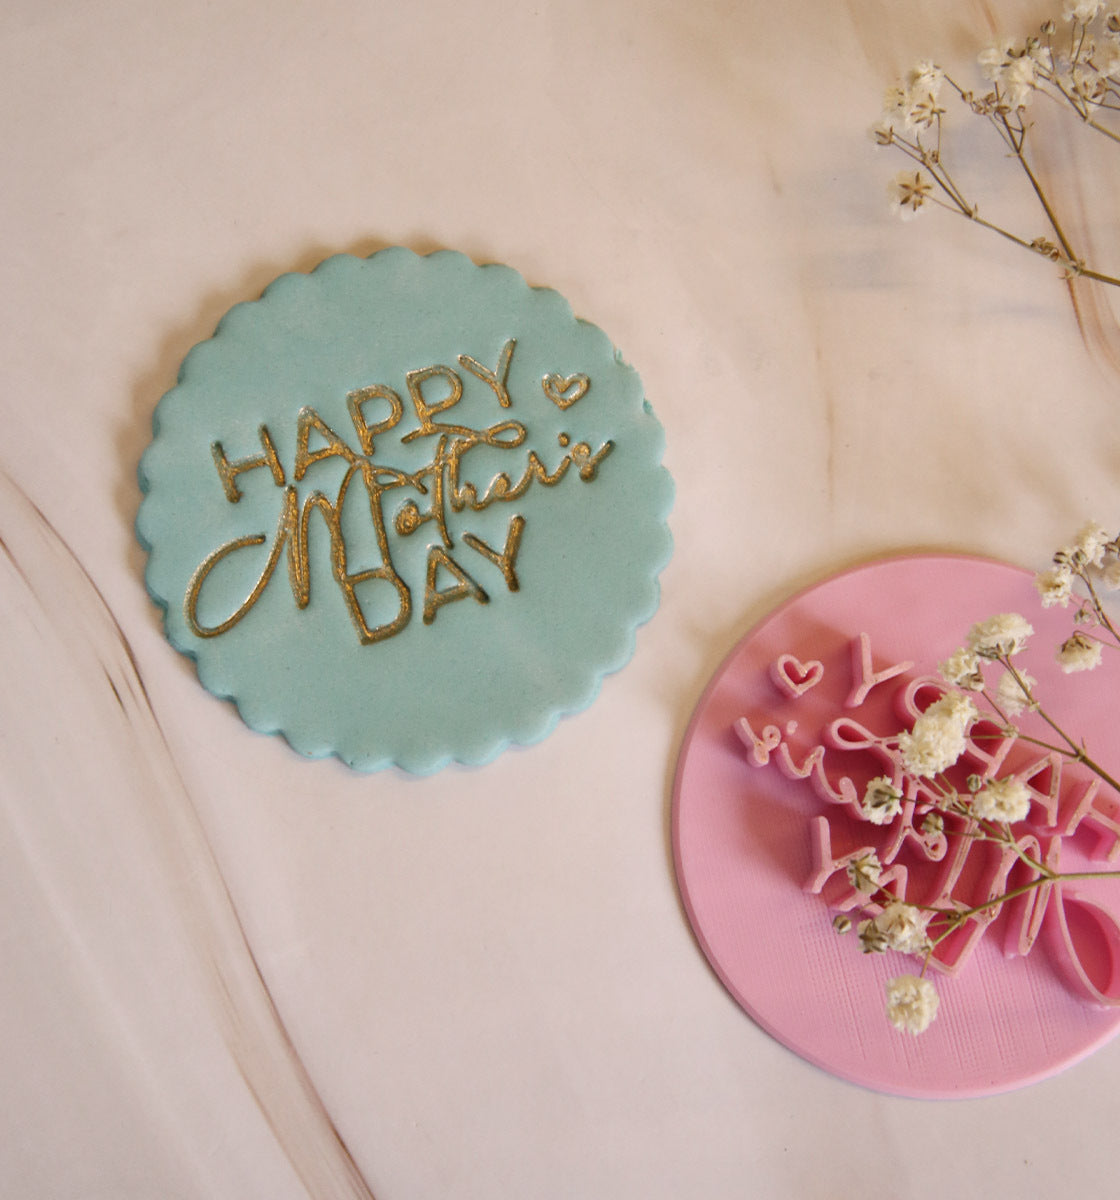 Happy Mother's Day - Cake Stamp